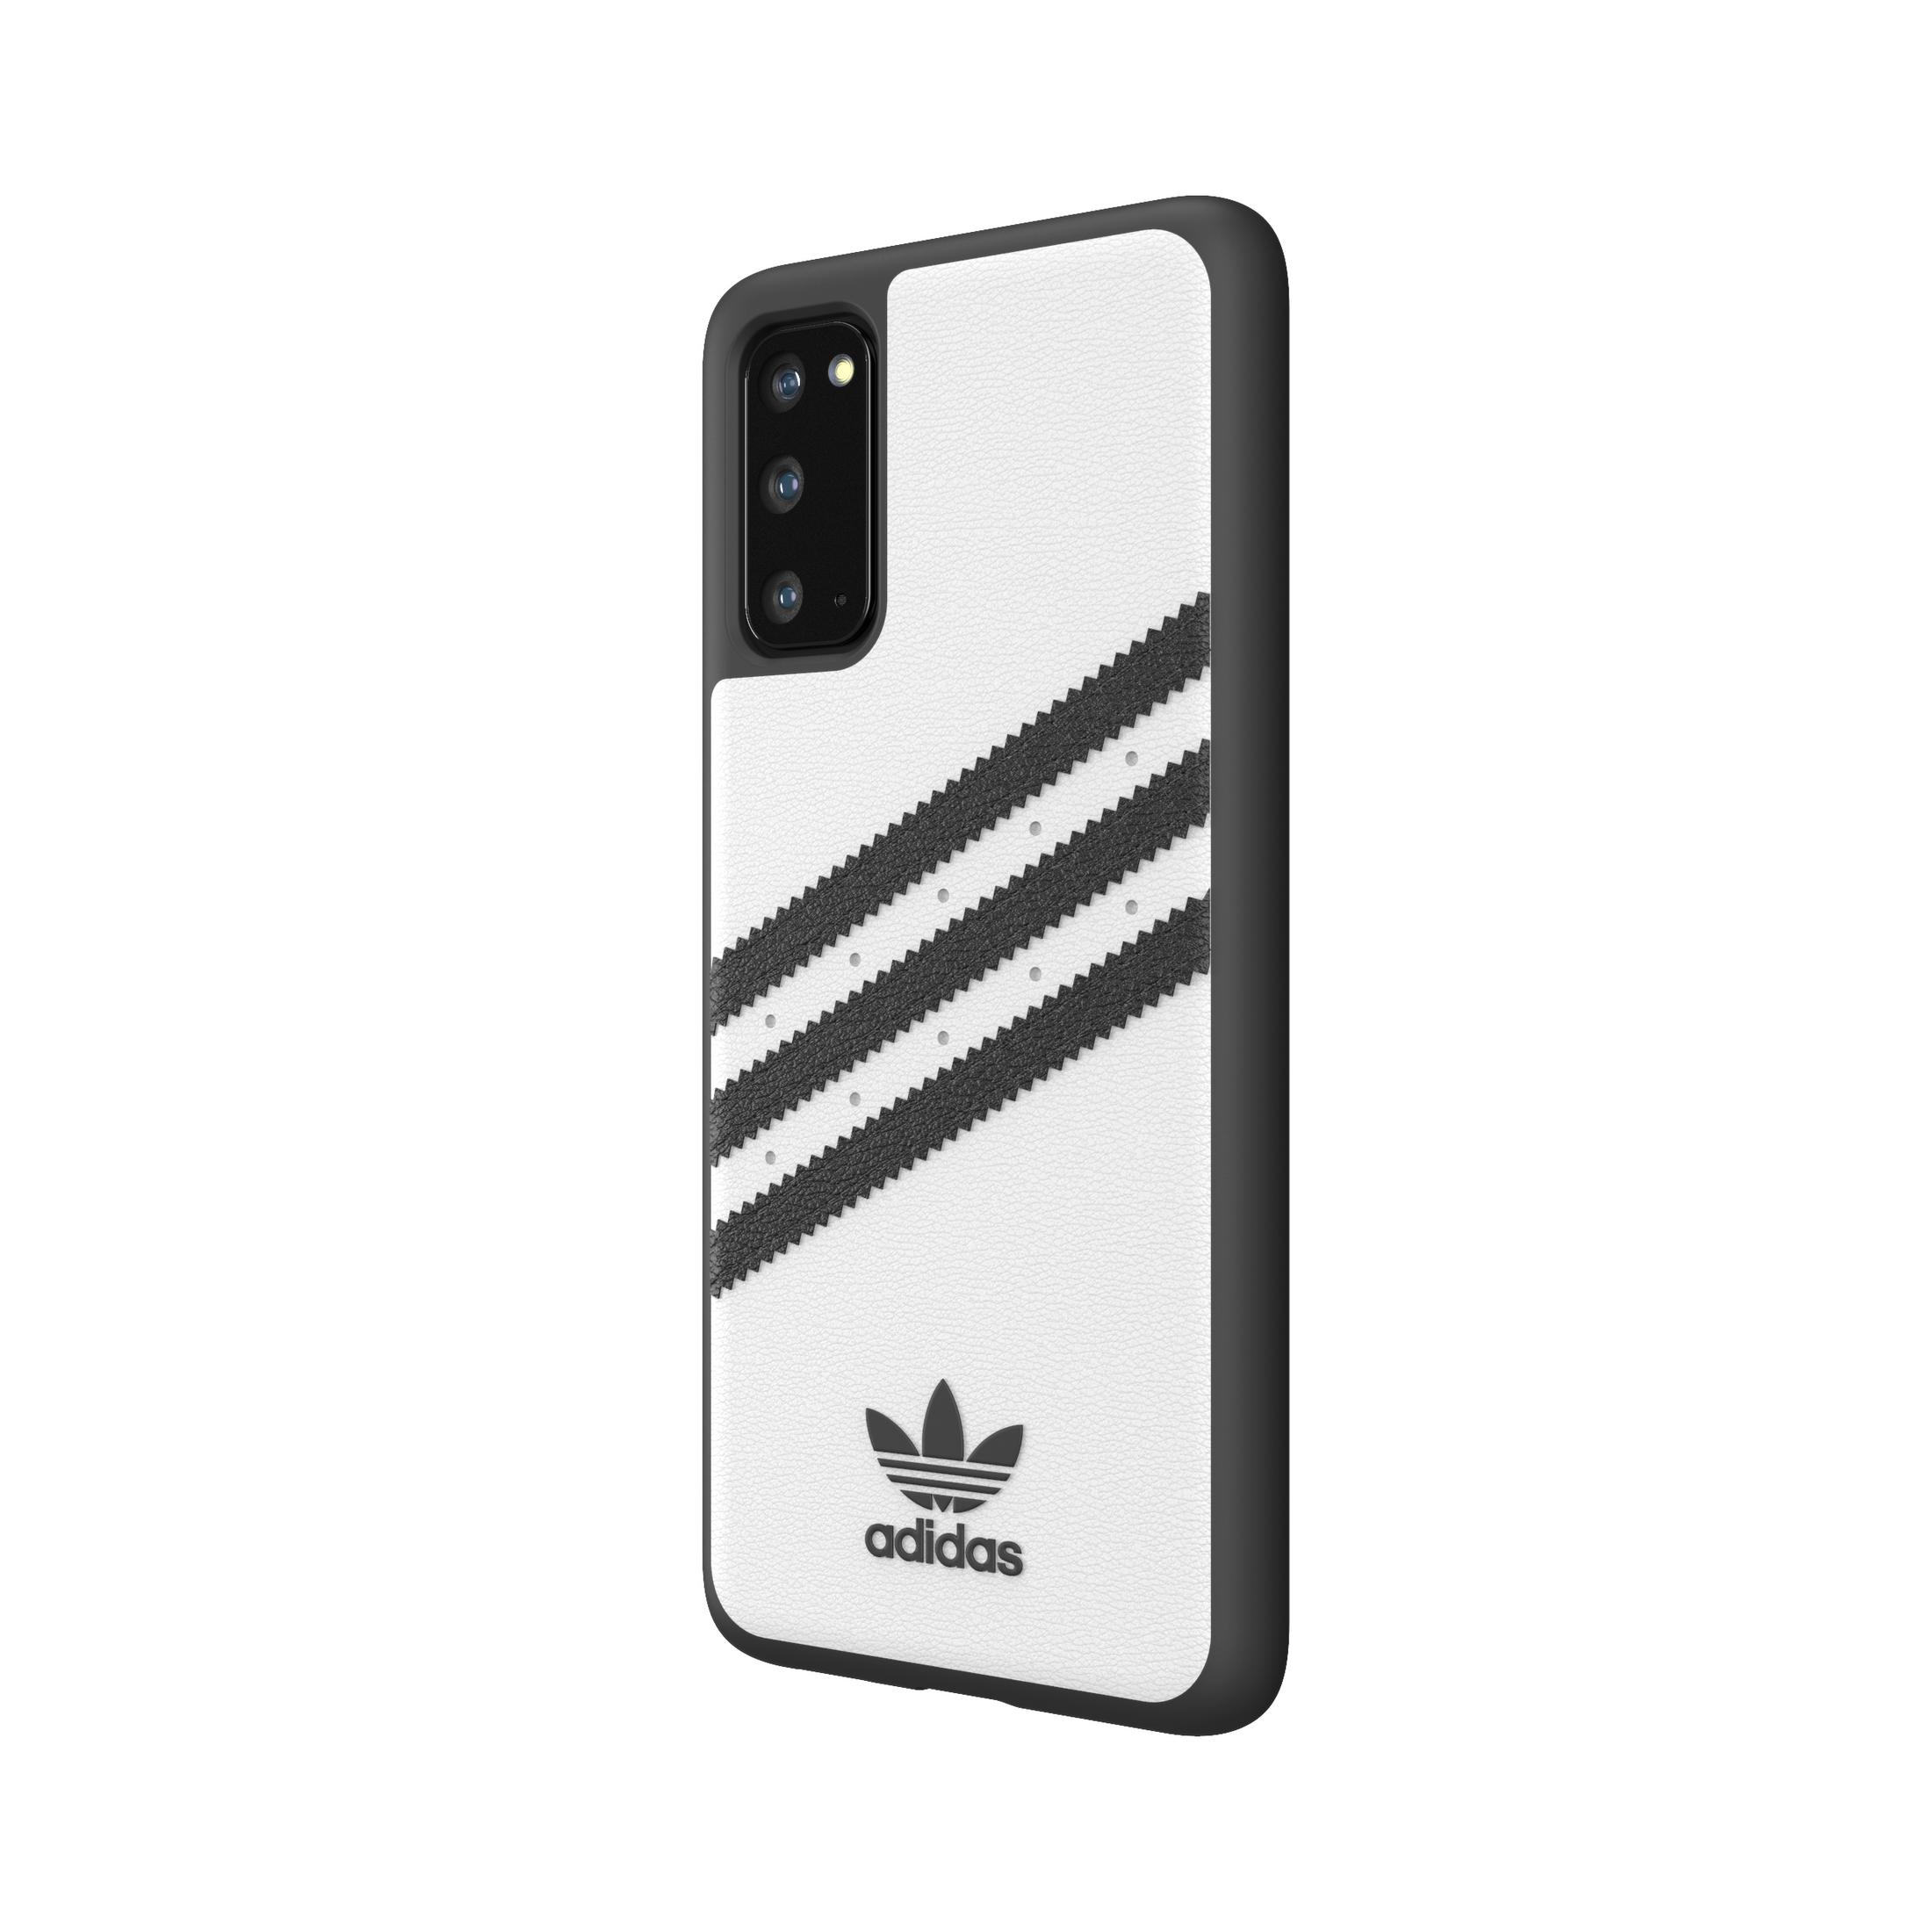 GALAXY WHITE PU, Moulded ADIDAS S20, Backcover, SAMSUNG, case